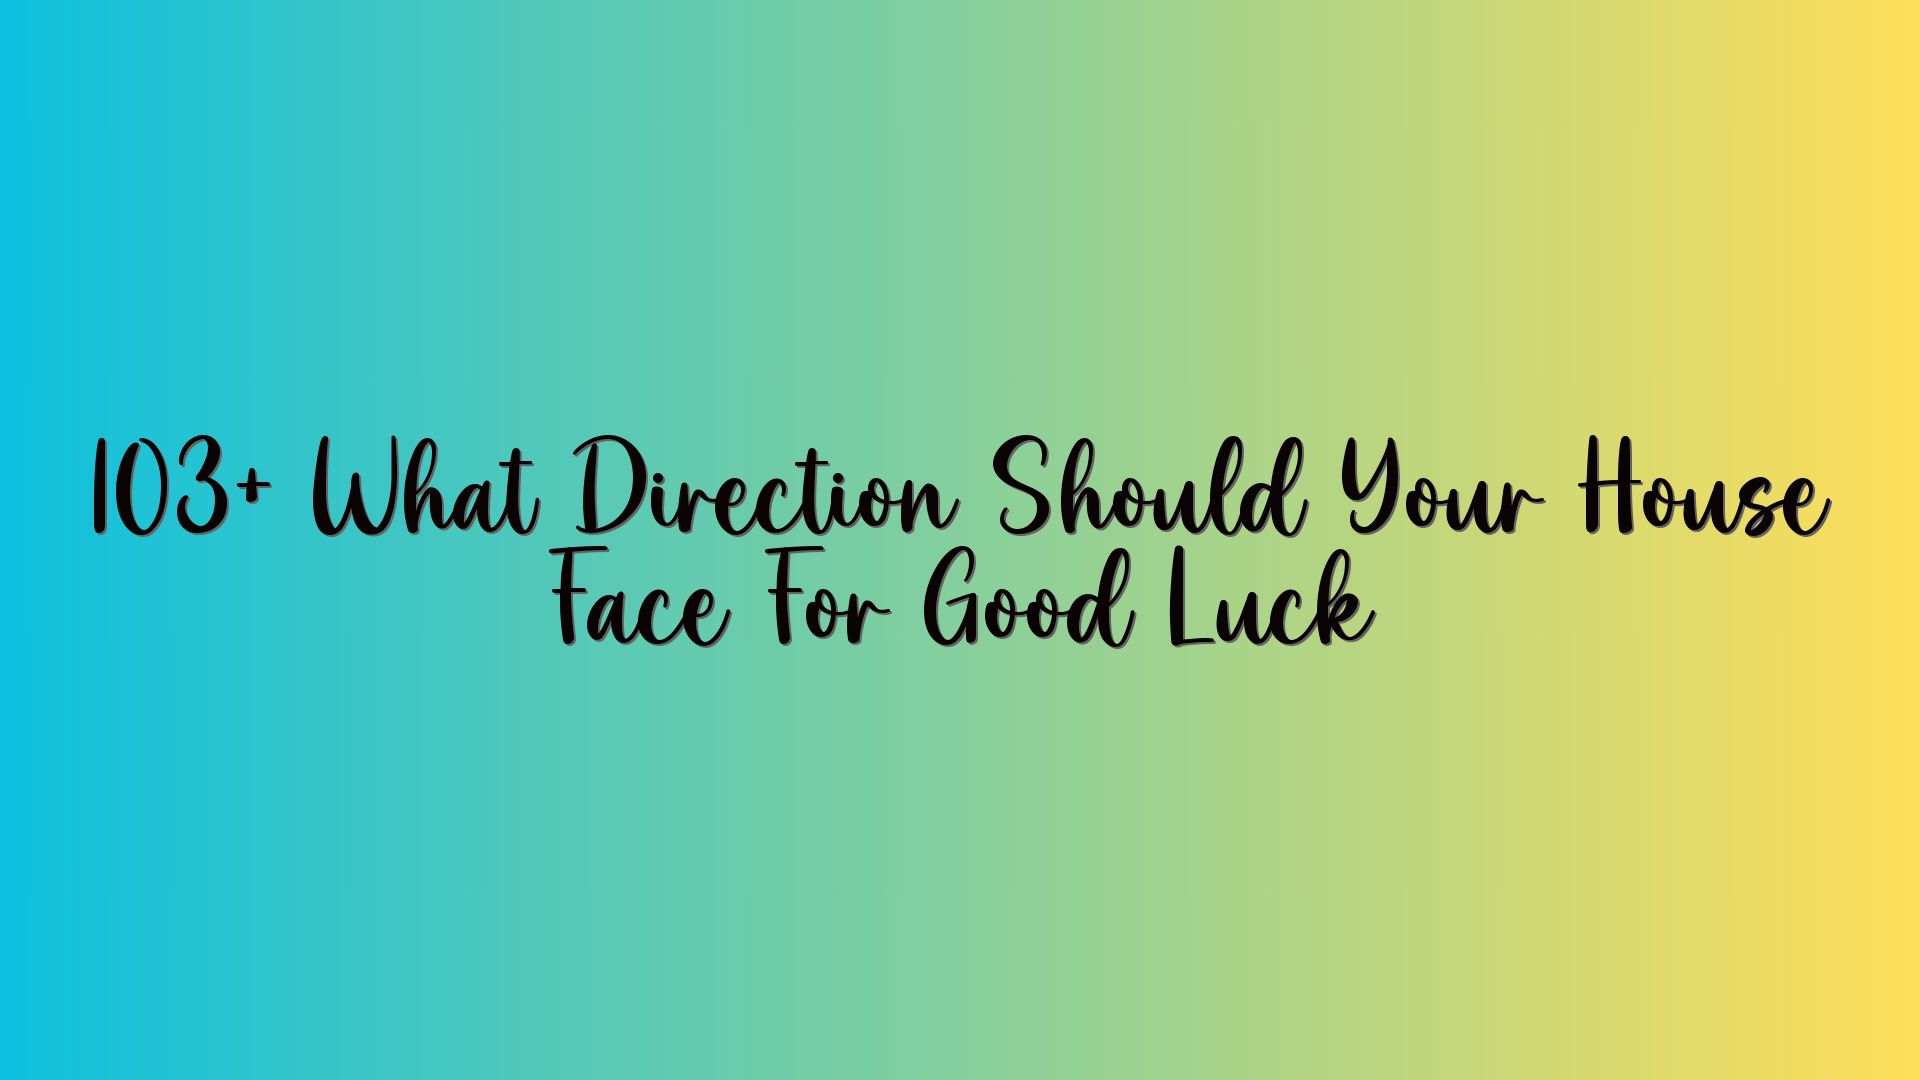 103+ What Direction Should Your House Face For Good Luck